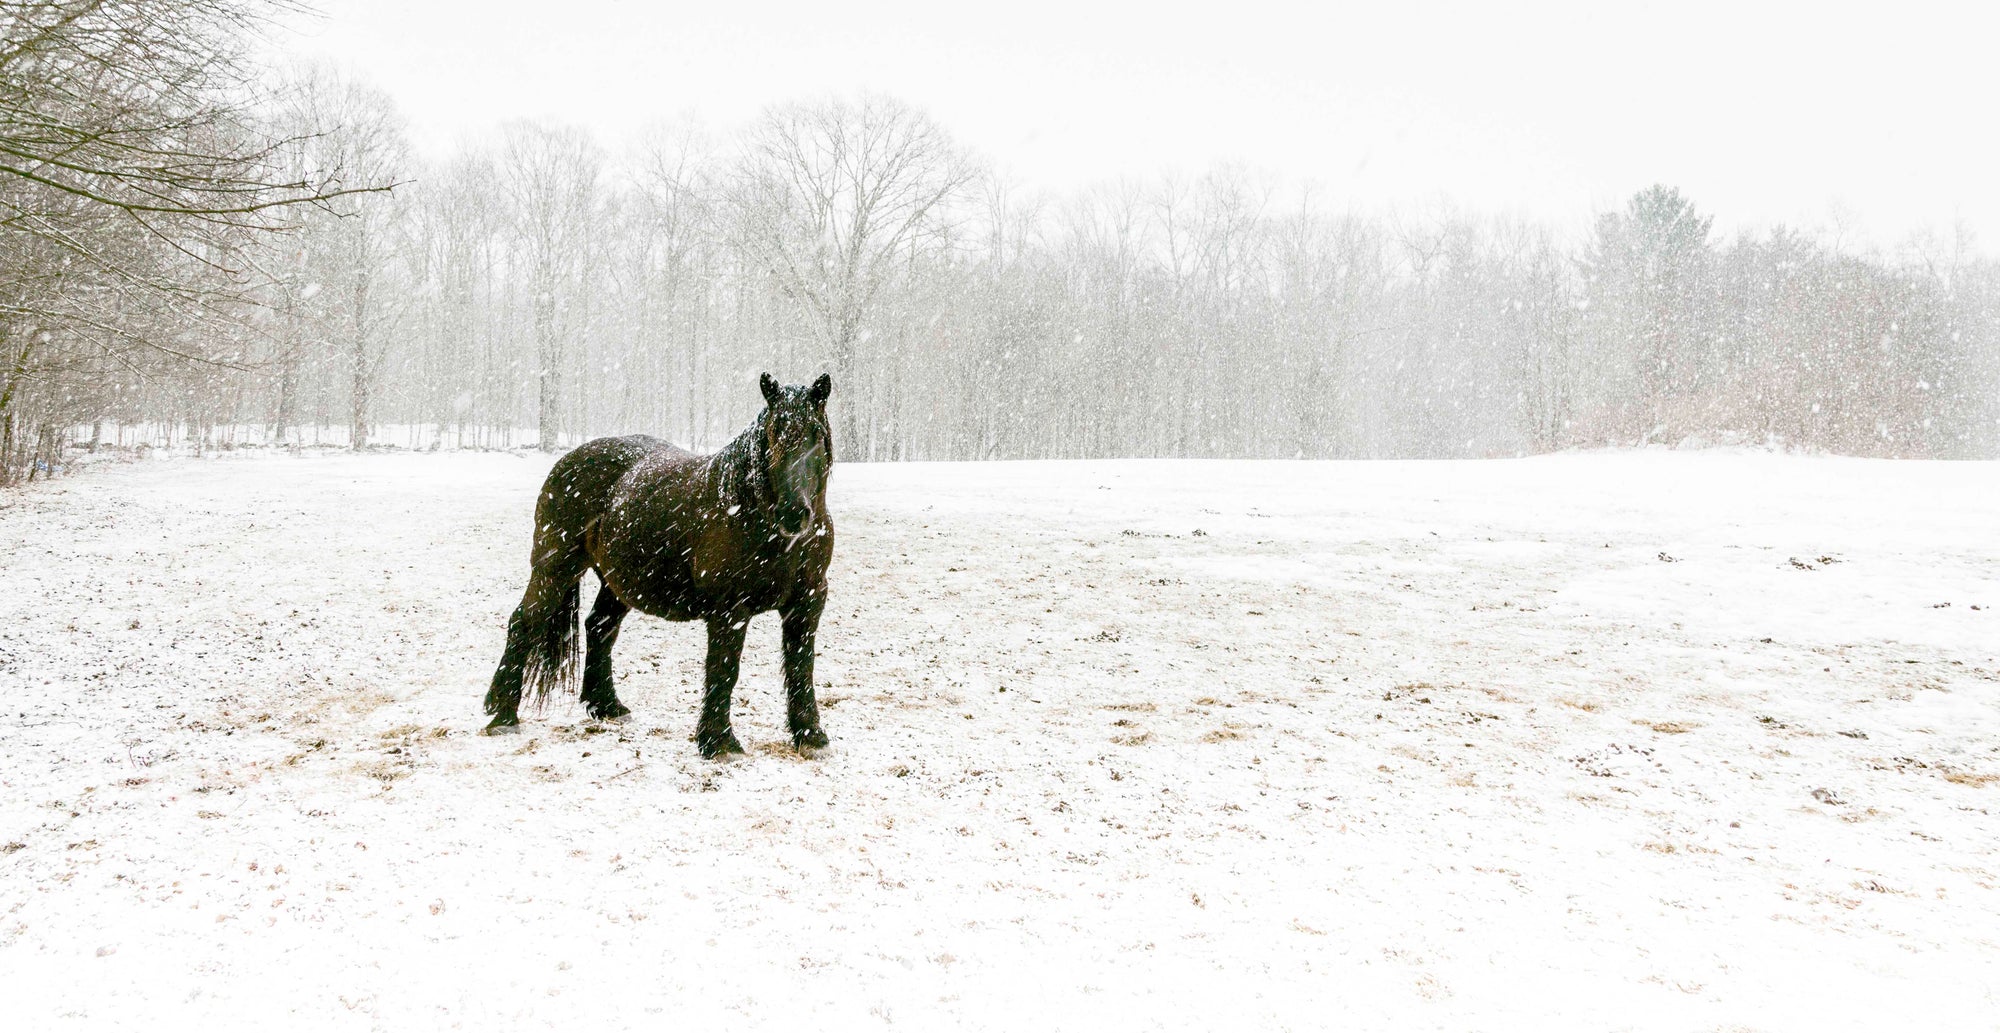 Black horse standing in a snow covered field